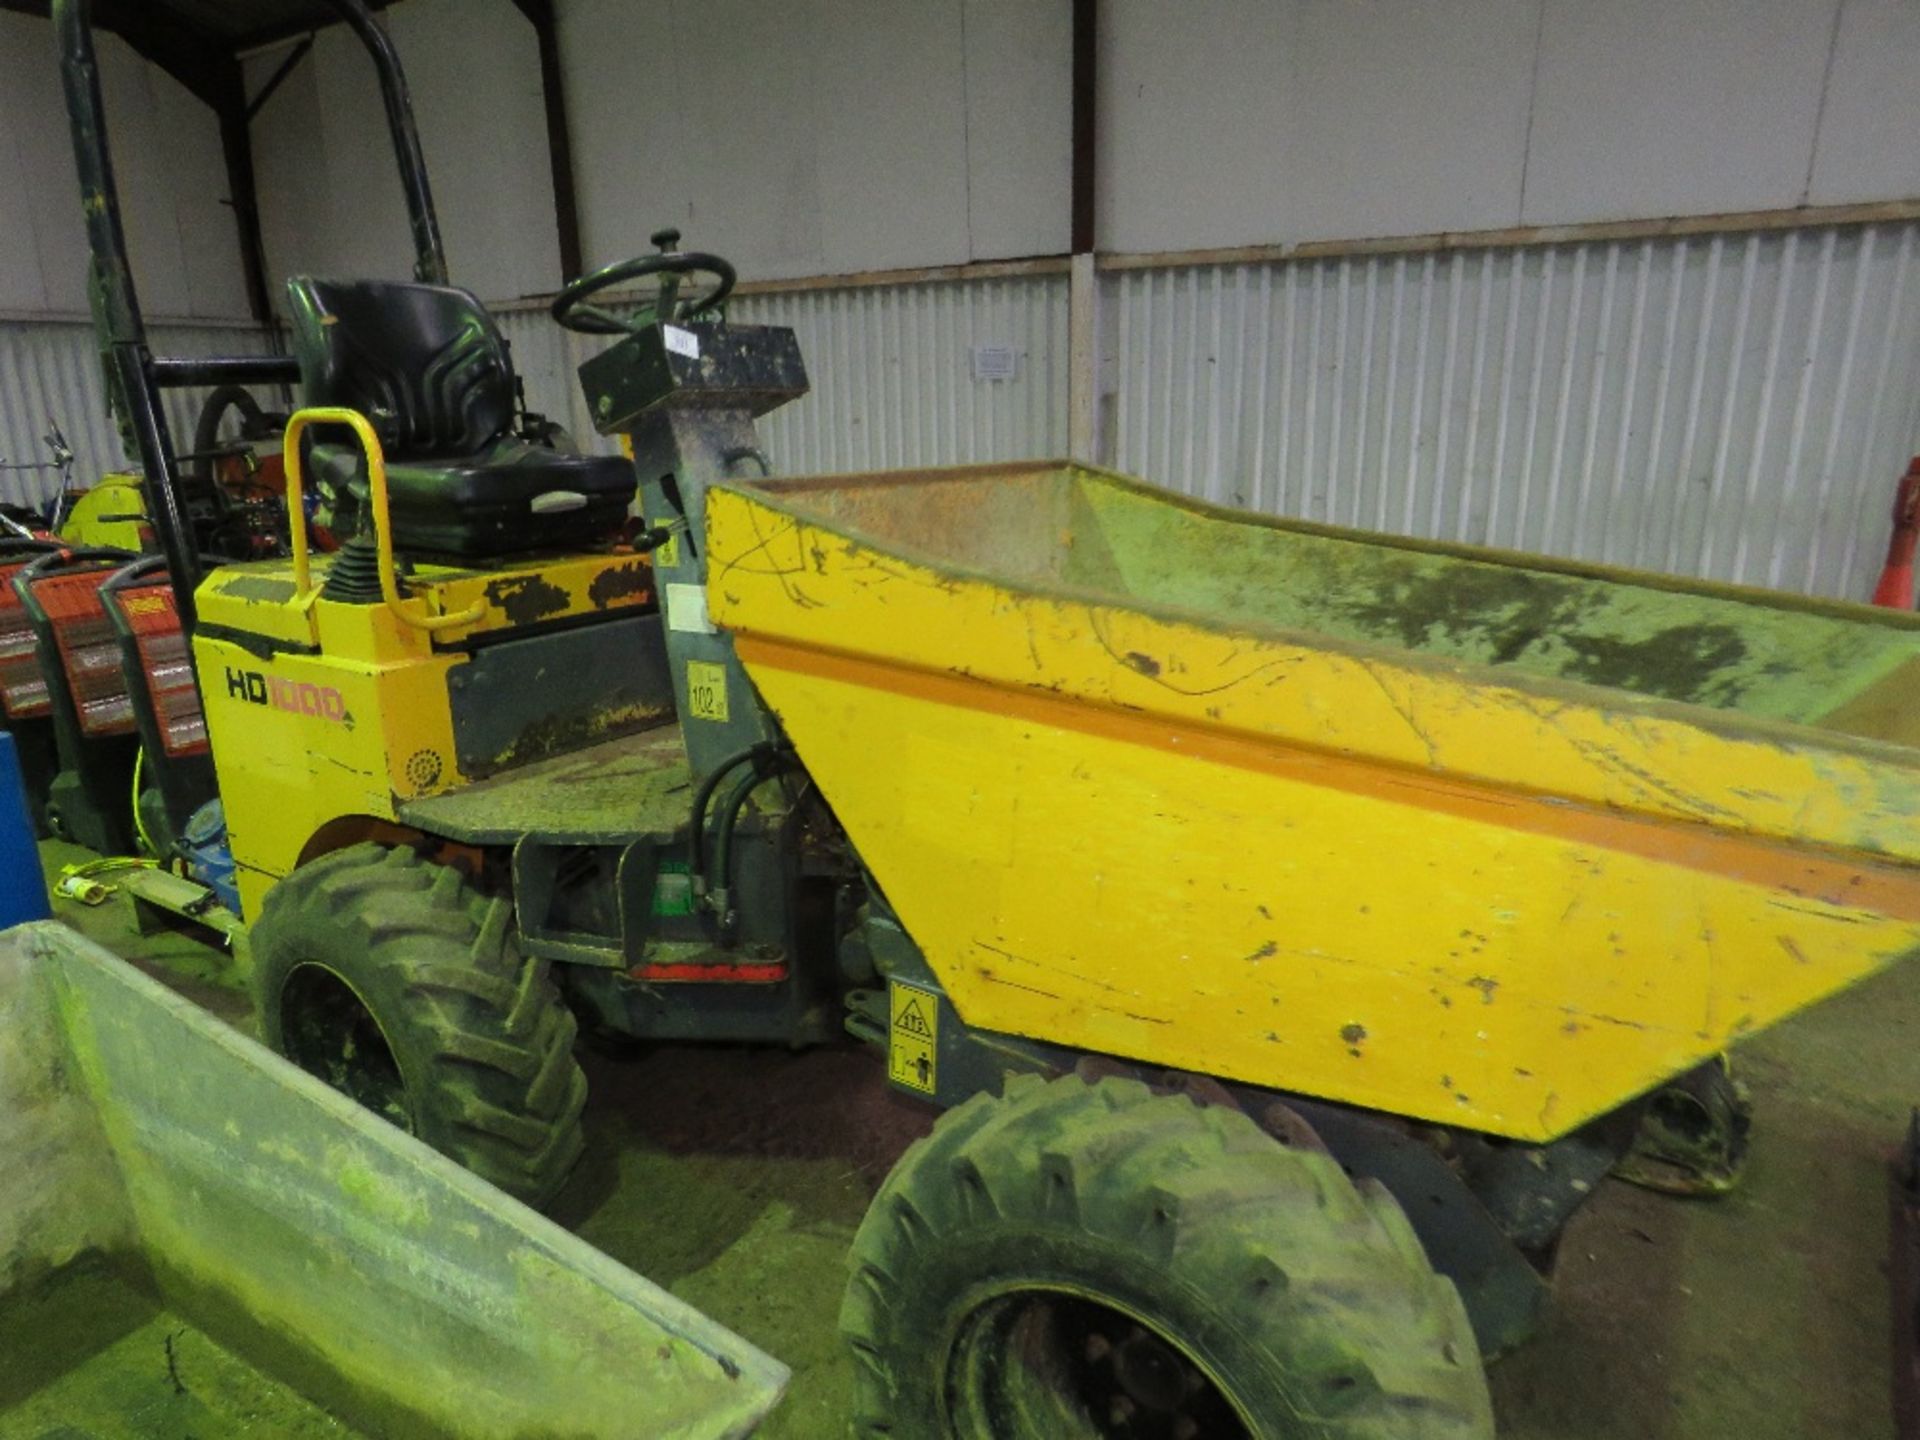 BENFORD HD1000 HIGH TIP DUMPER, YR2006 SN: SLBDRP00E604HM171 DIRECT FROM LOCAL COMPANY. WHEN